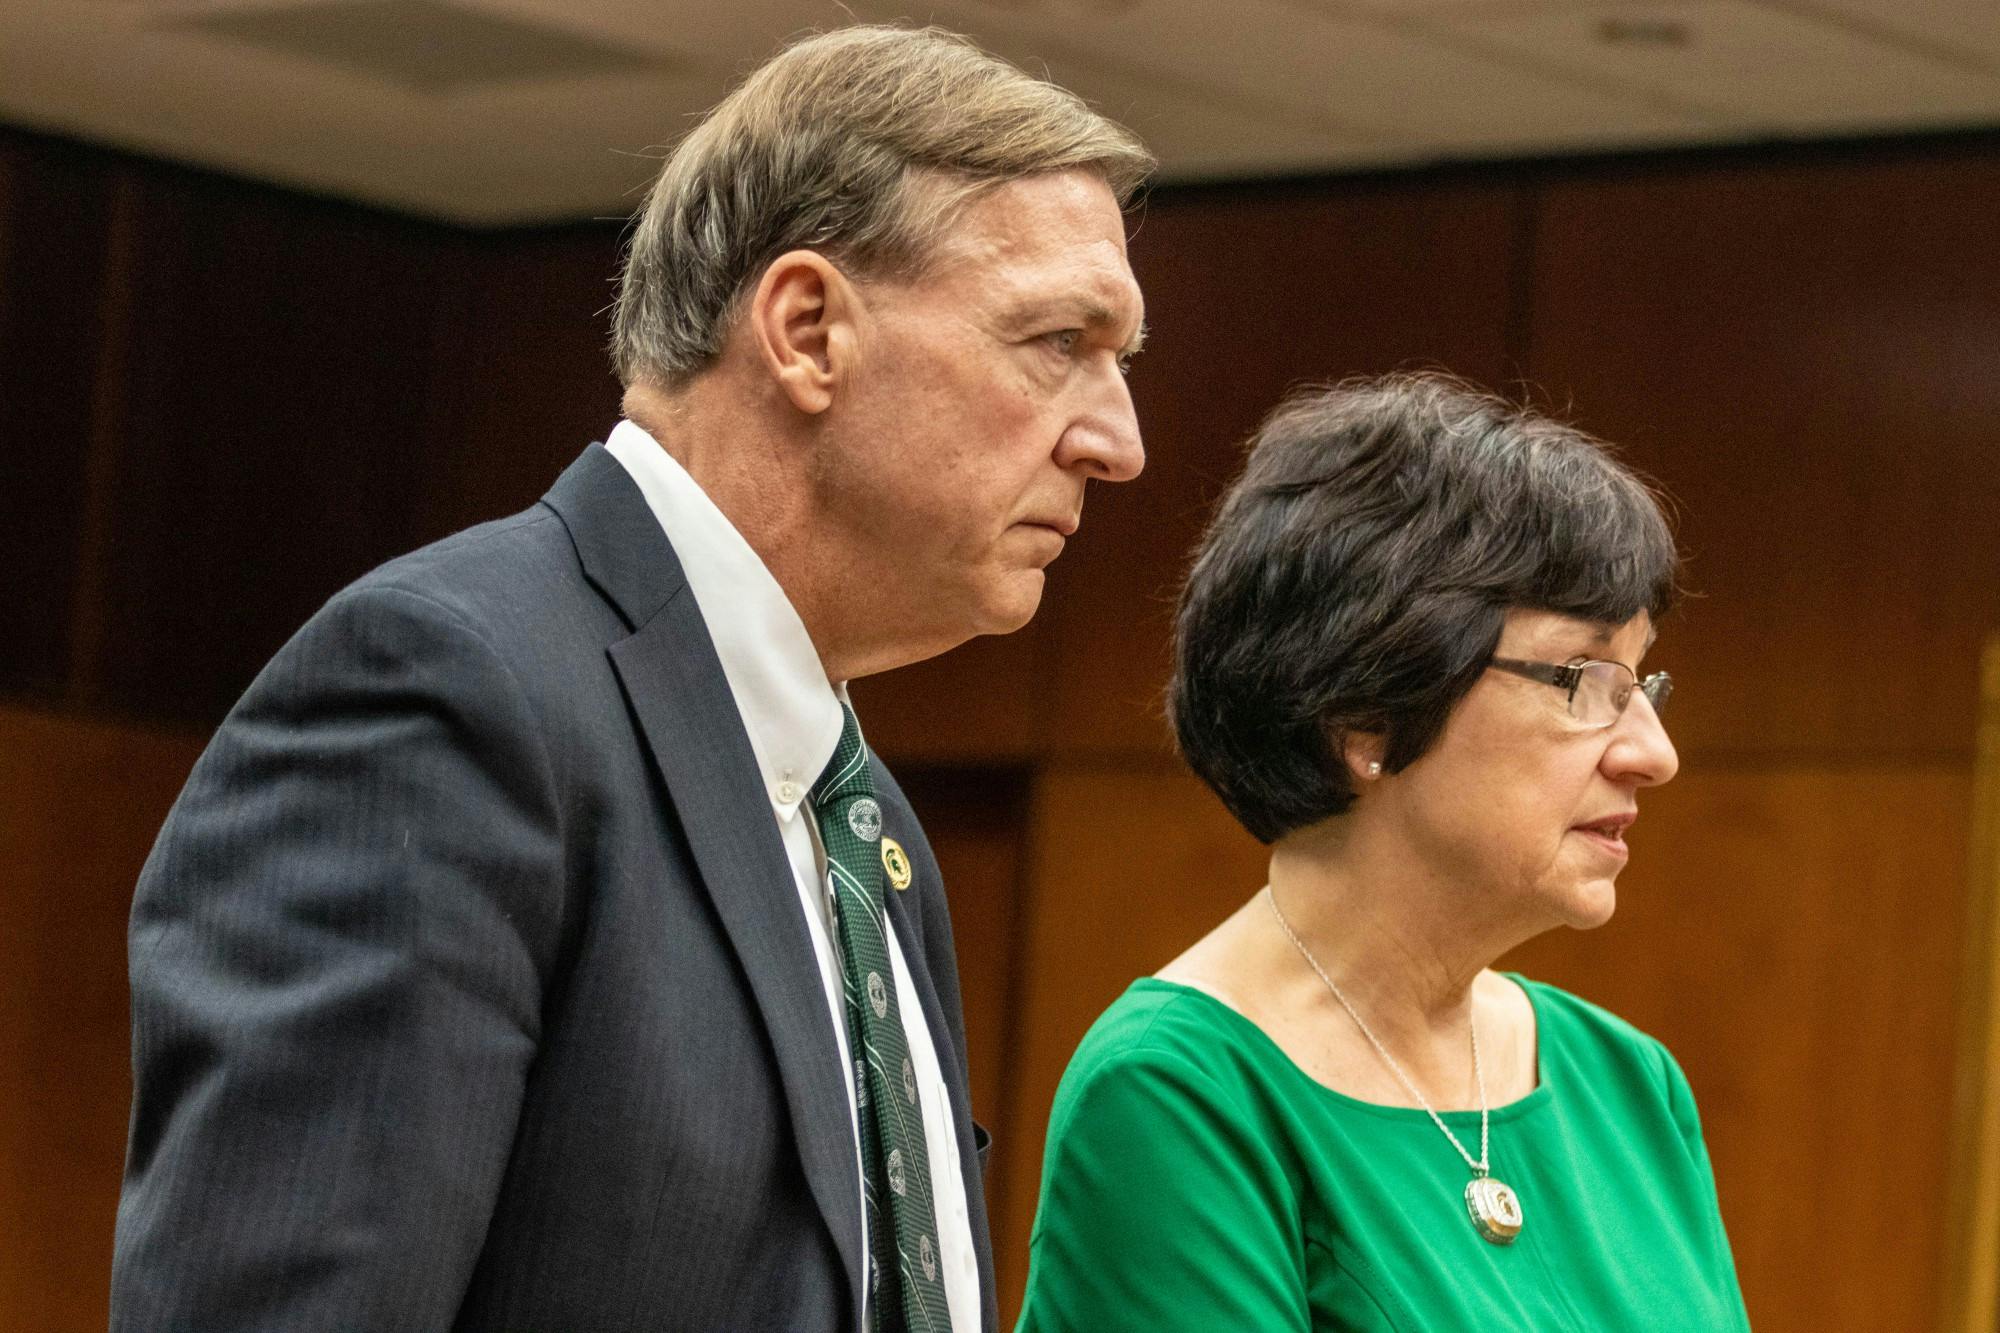 <p>MSU President Samuel L. Stanley Jr., left, and Trustee Dianne Byrum, right, listen at a press conference at the Board of Trustees meeting on Dec. 13. 2022. </p>